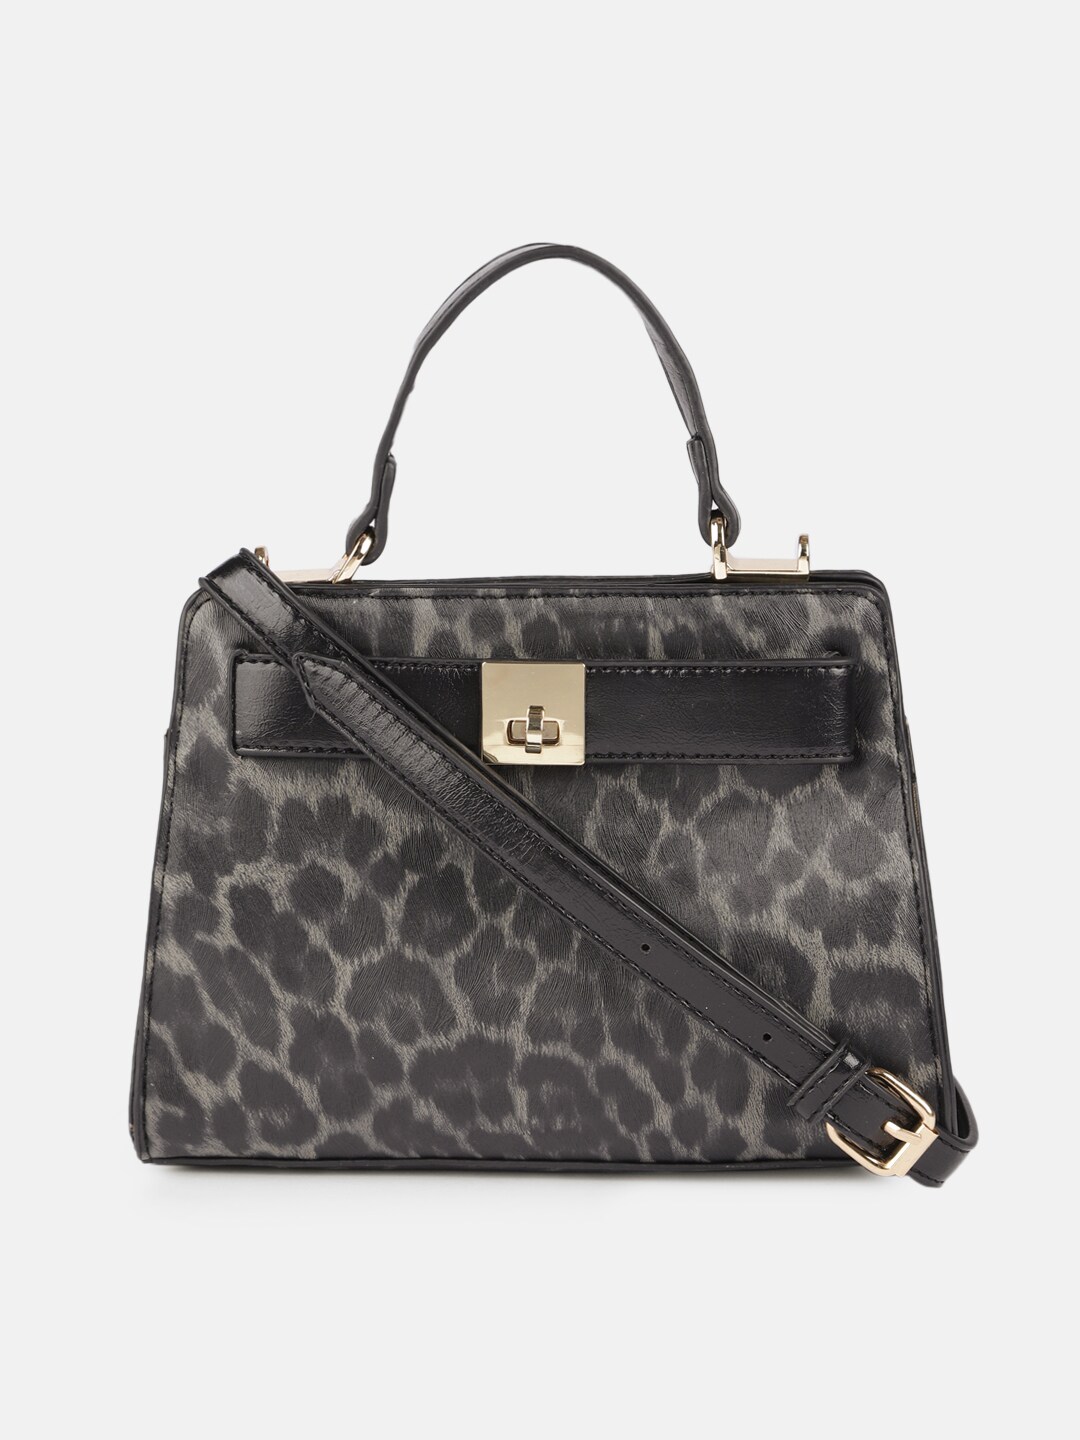 DressBerry Black Animal Printed PU Structured Sling Bag Price in India